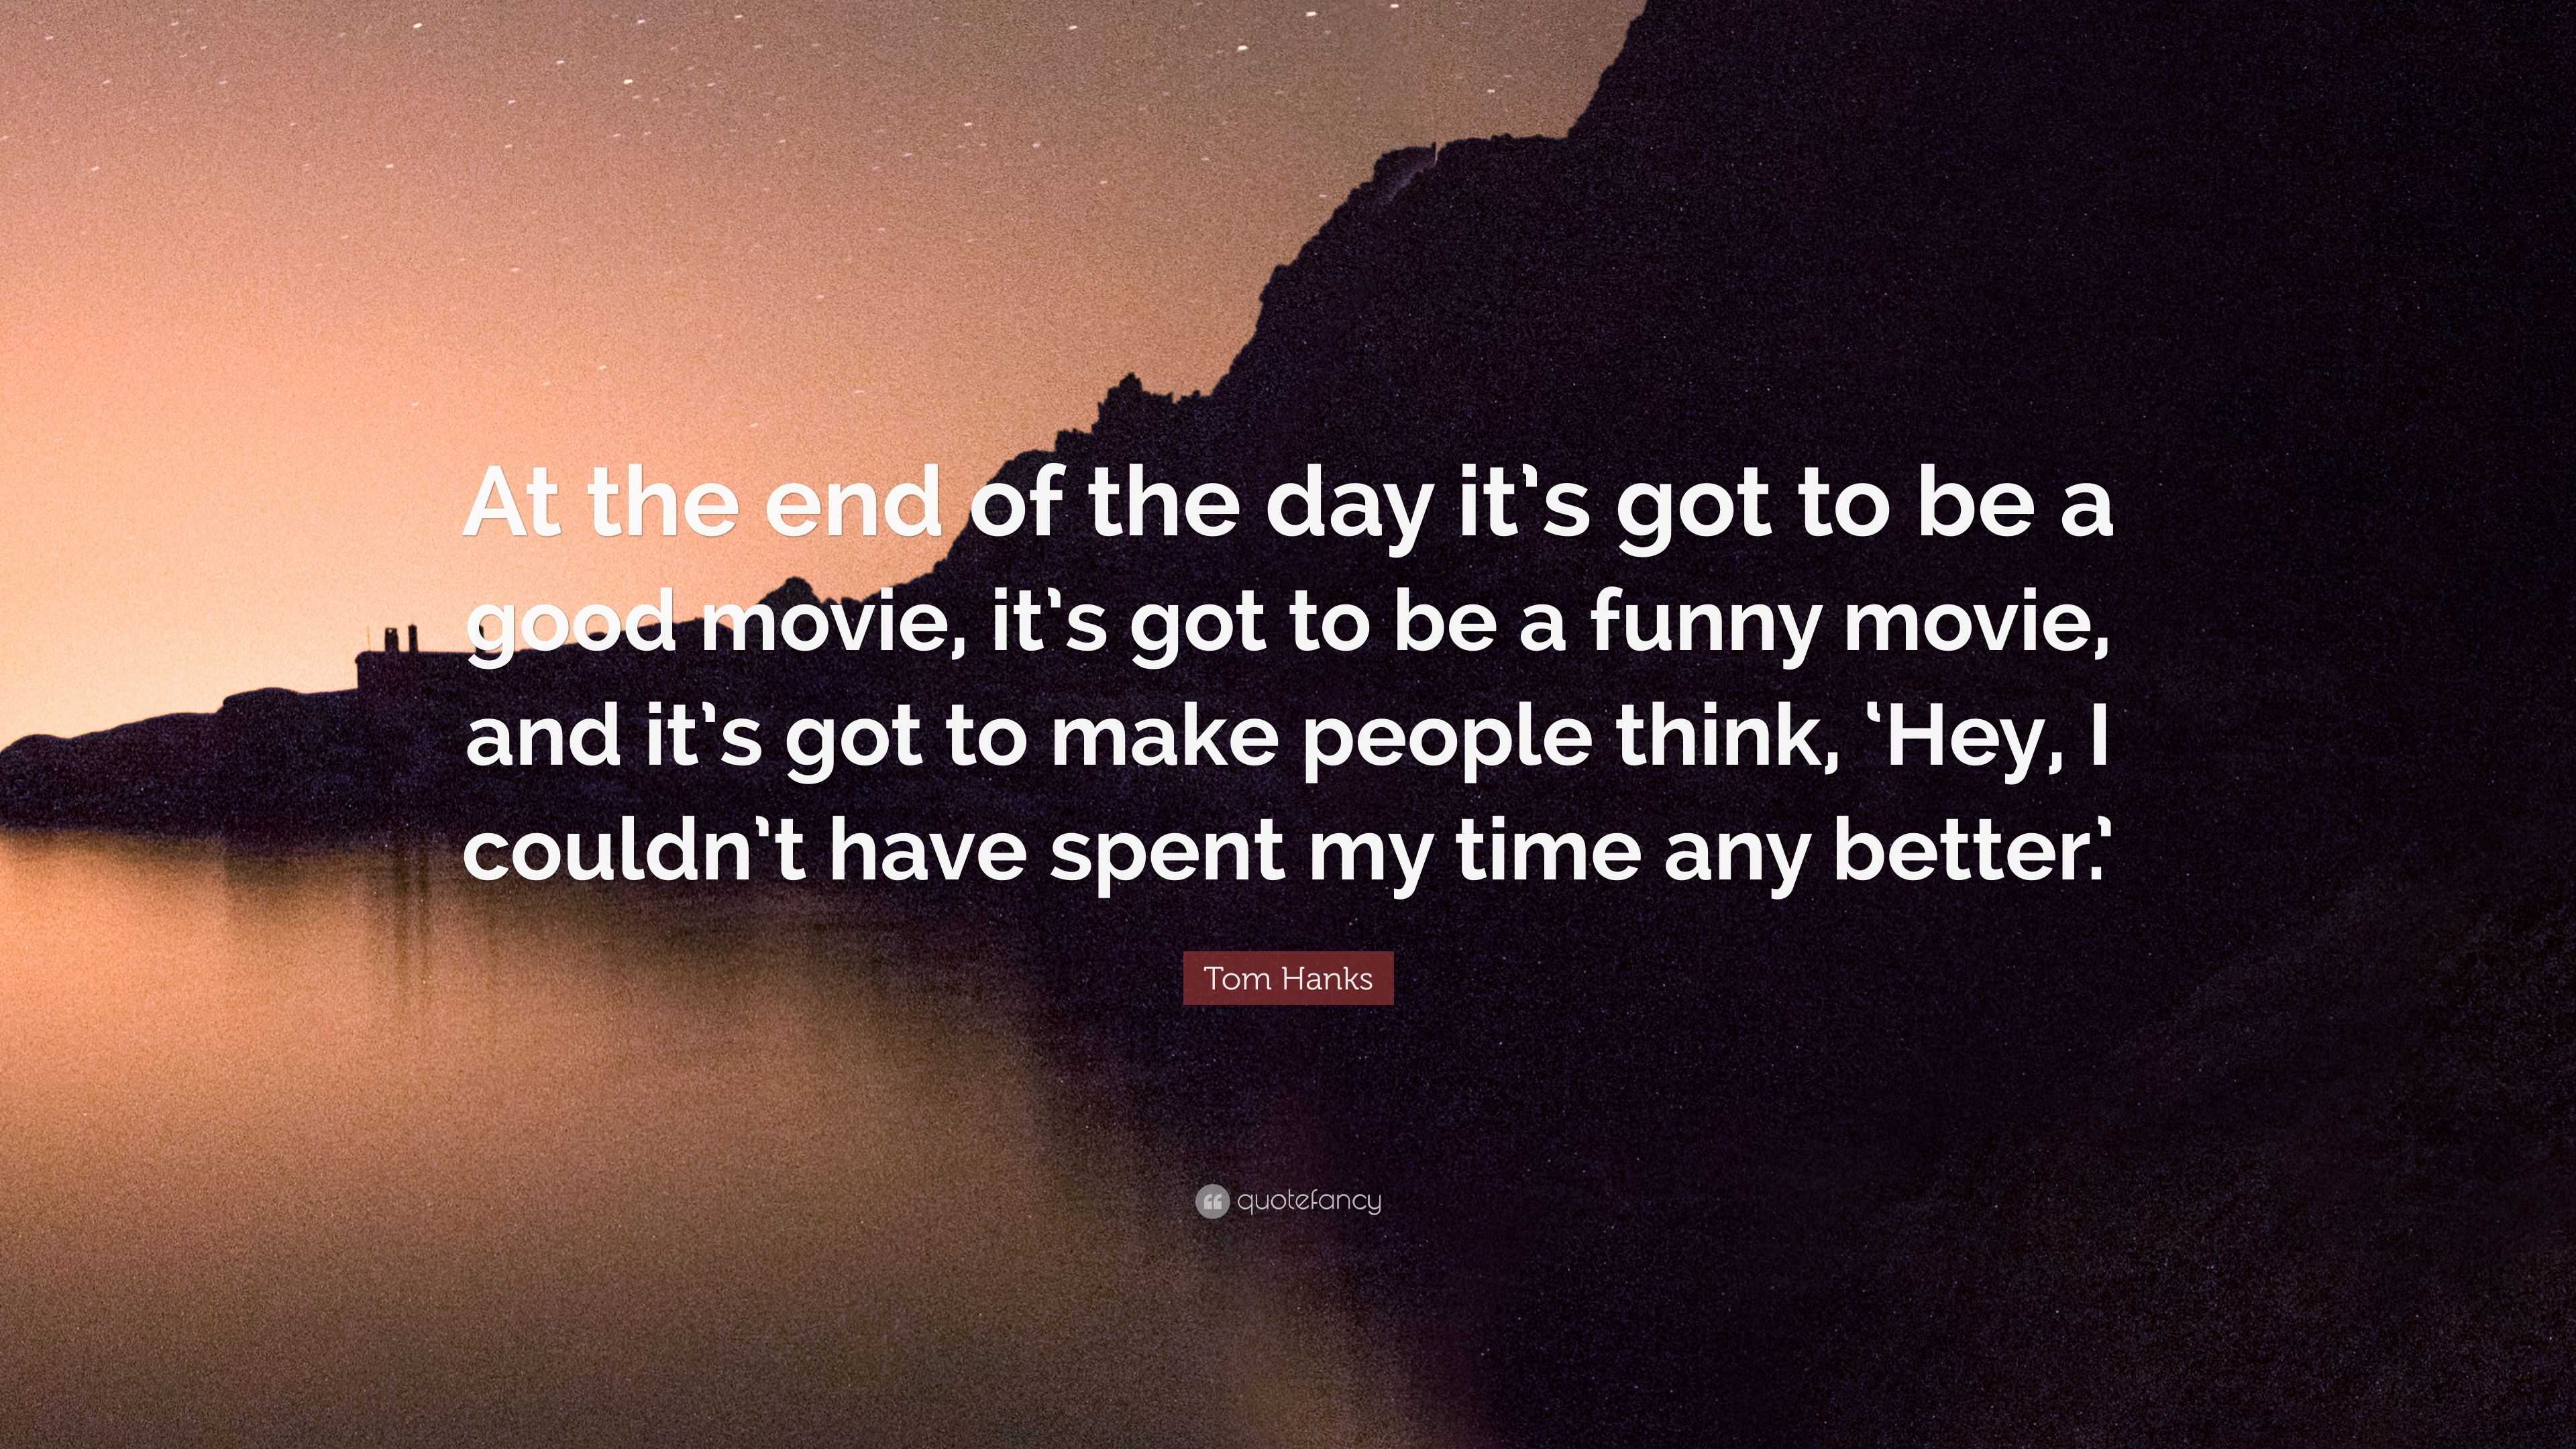 Tom Hanks Quote: “At the end of the day it's got to be a good